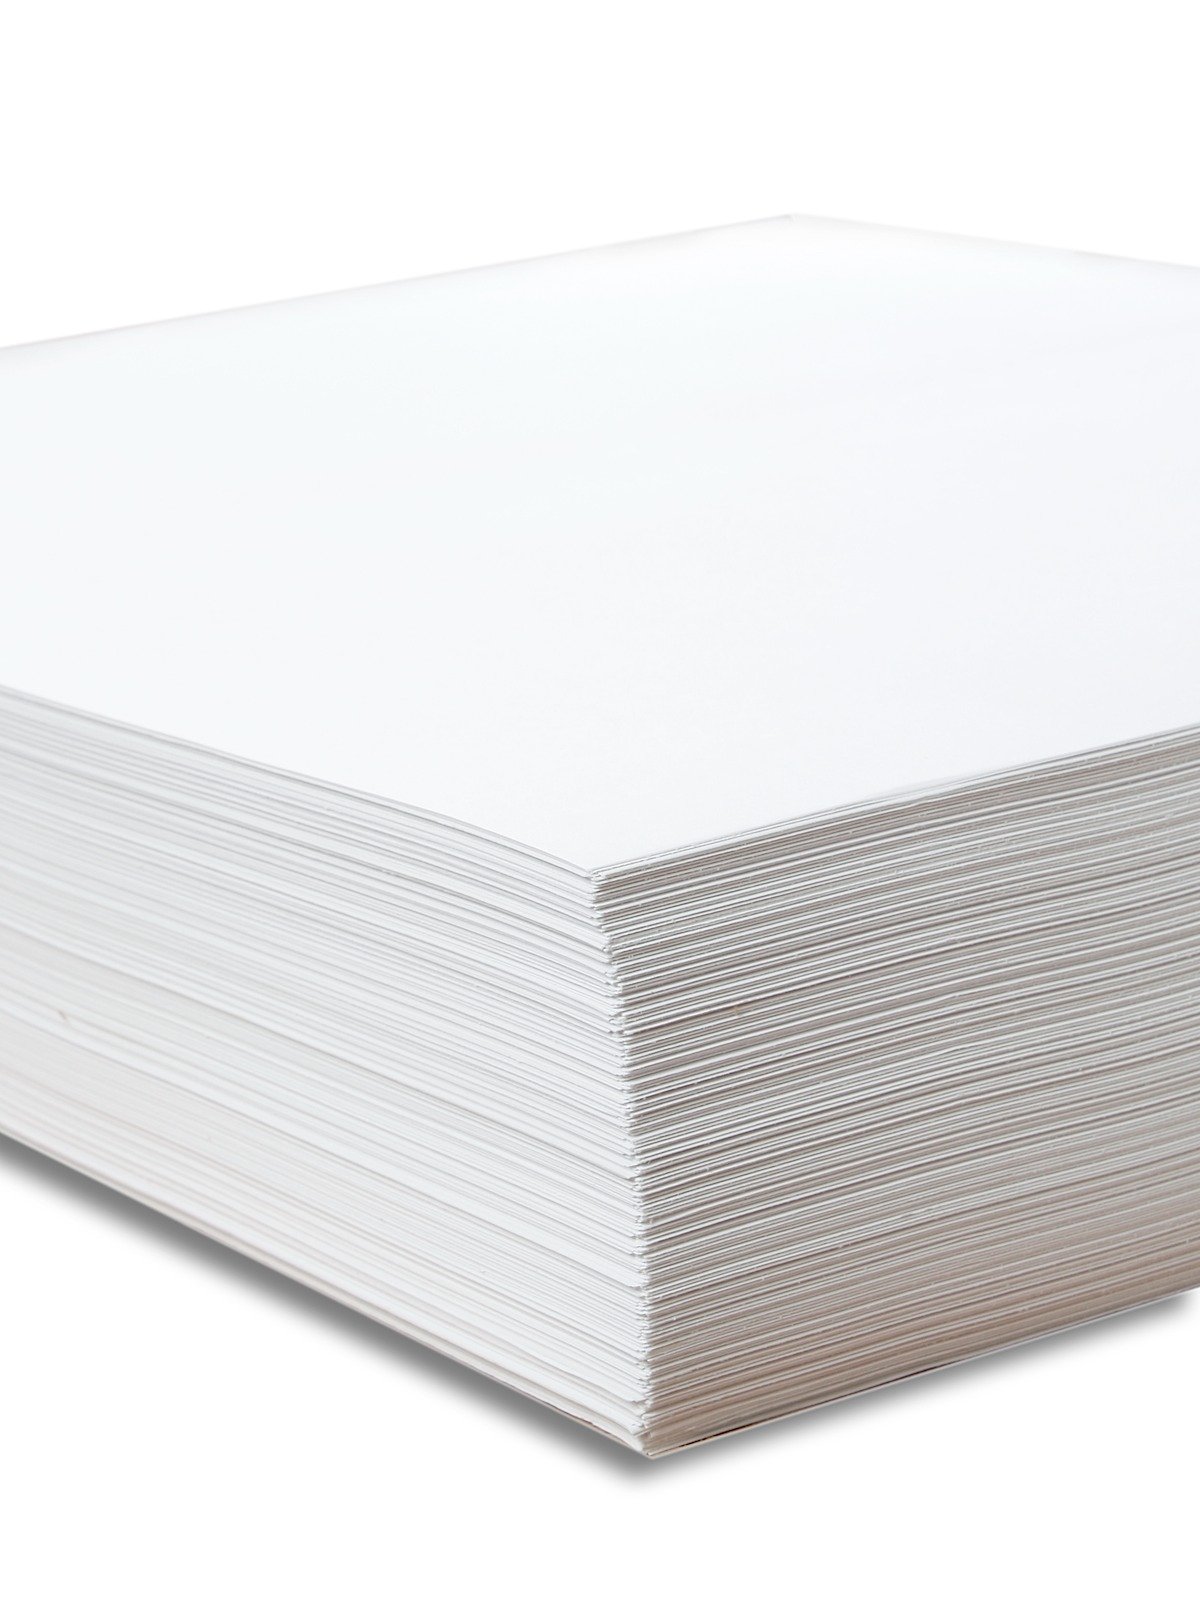  Pacon Drawing Paper, White, Standard Weight, 18 x 24